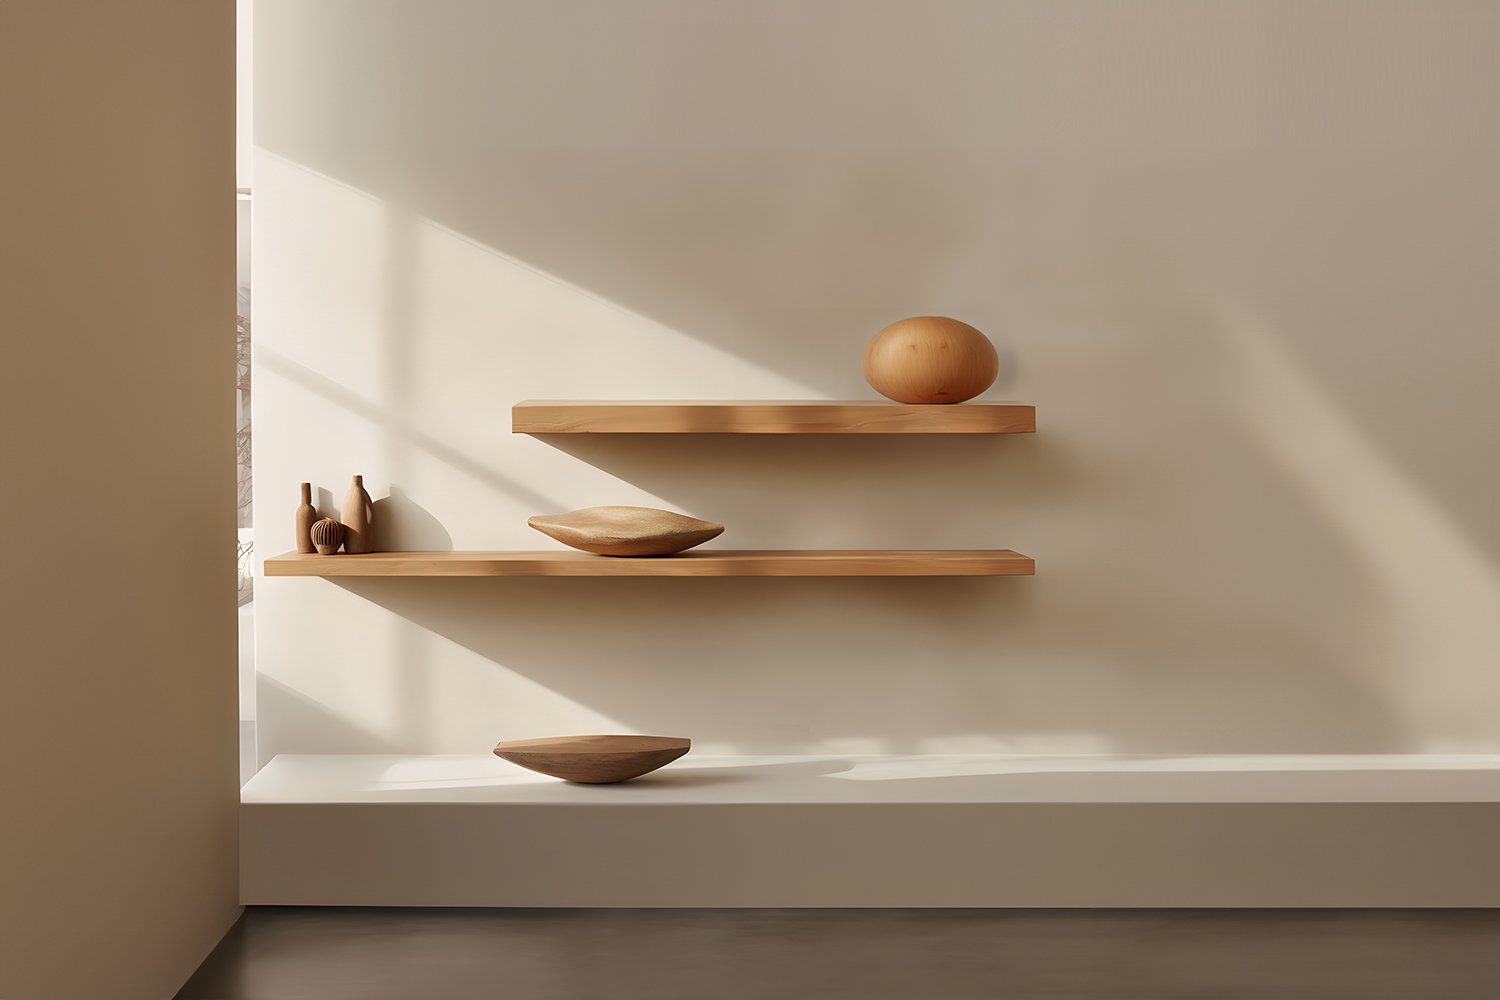 Individual Floating Shelf with One Sculptural Wooden Pebble Accent, Sereno by Joel Escalona — 4.jpg